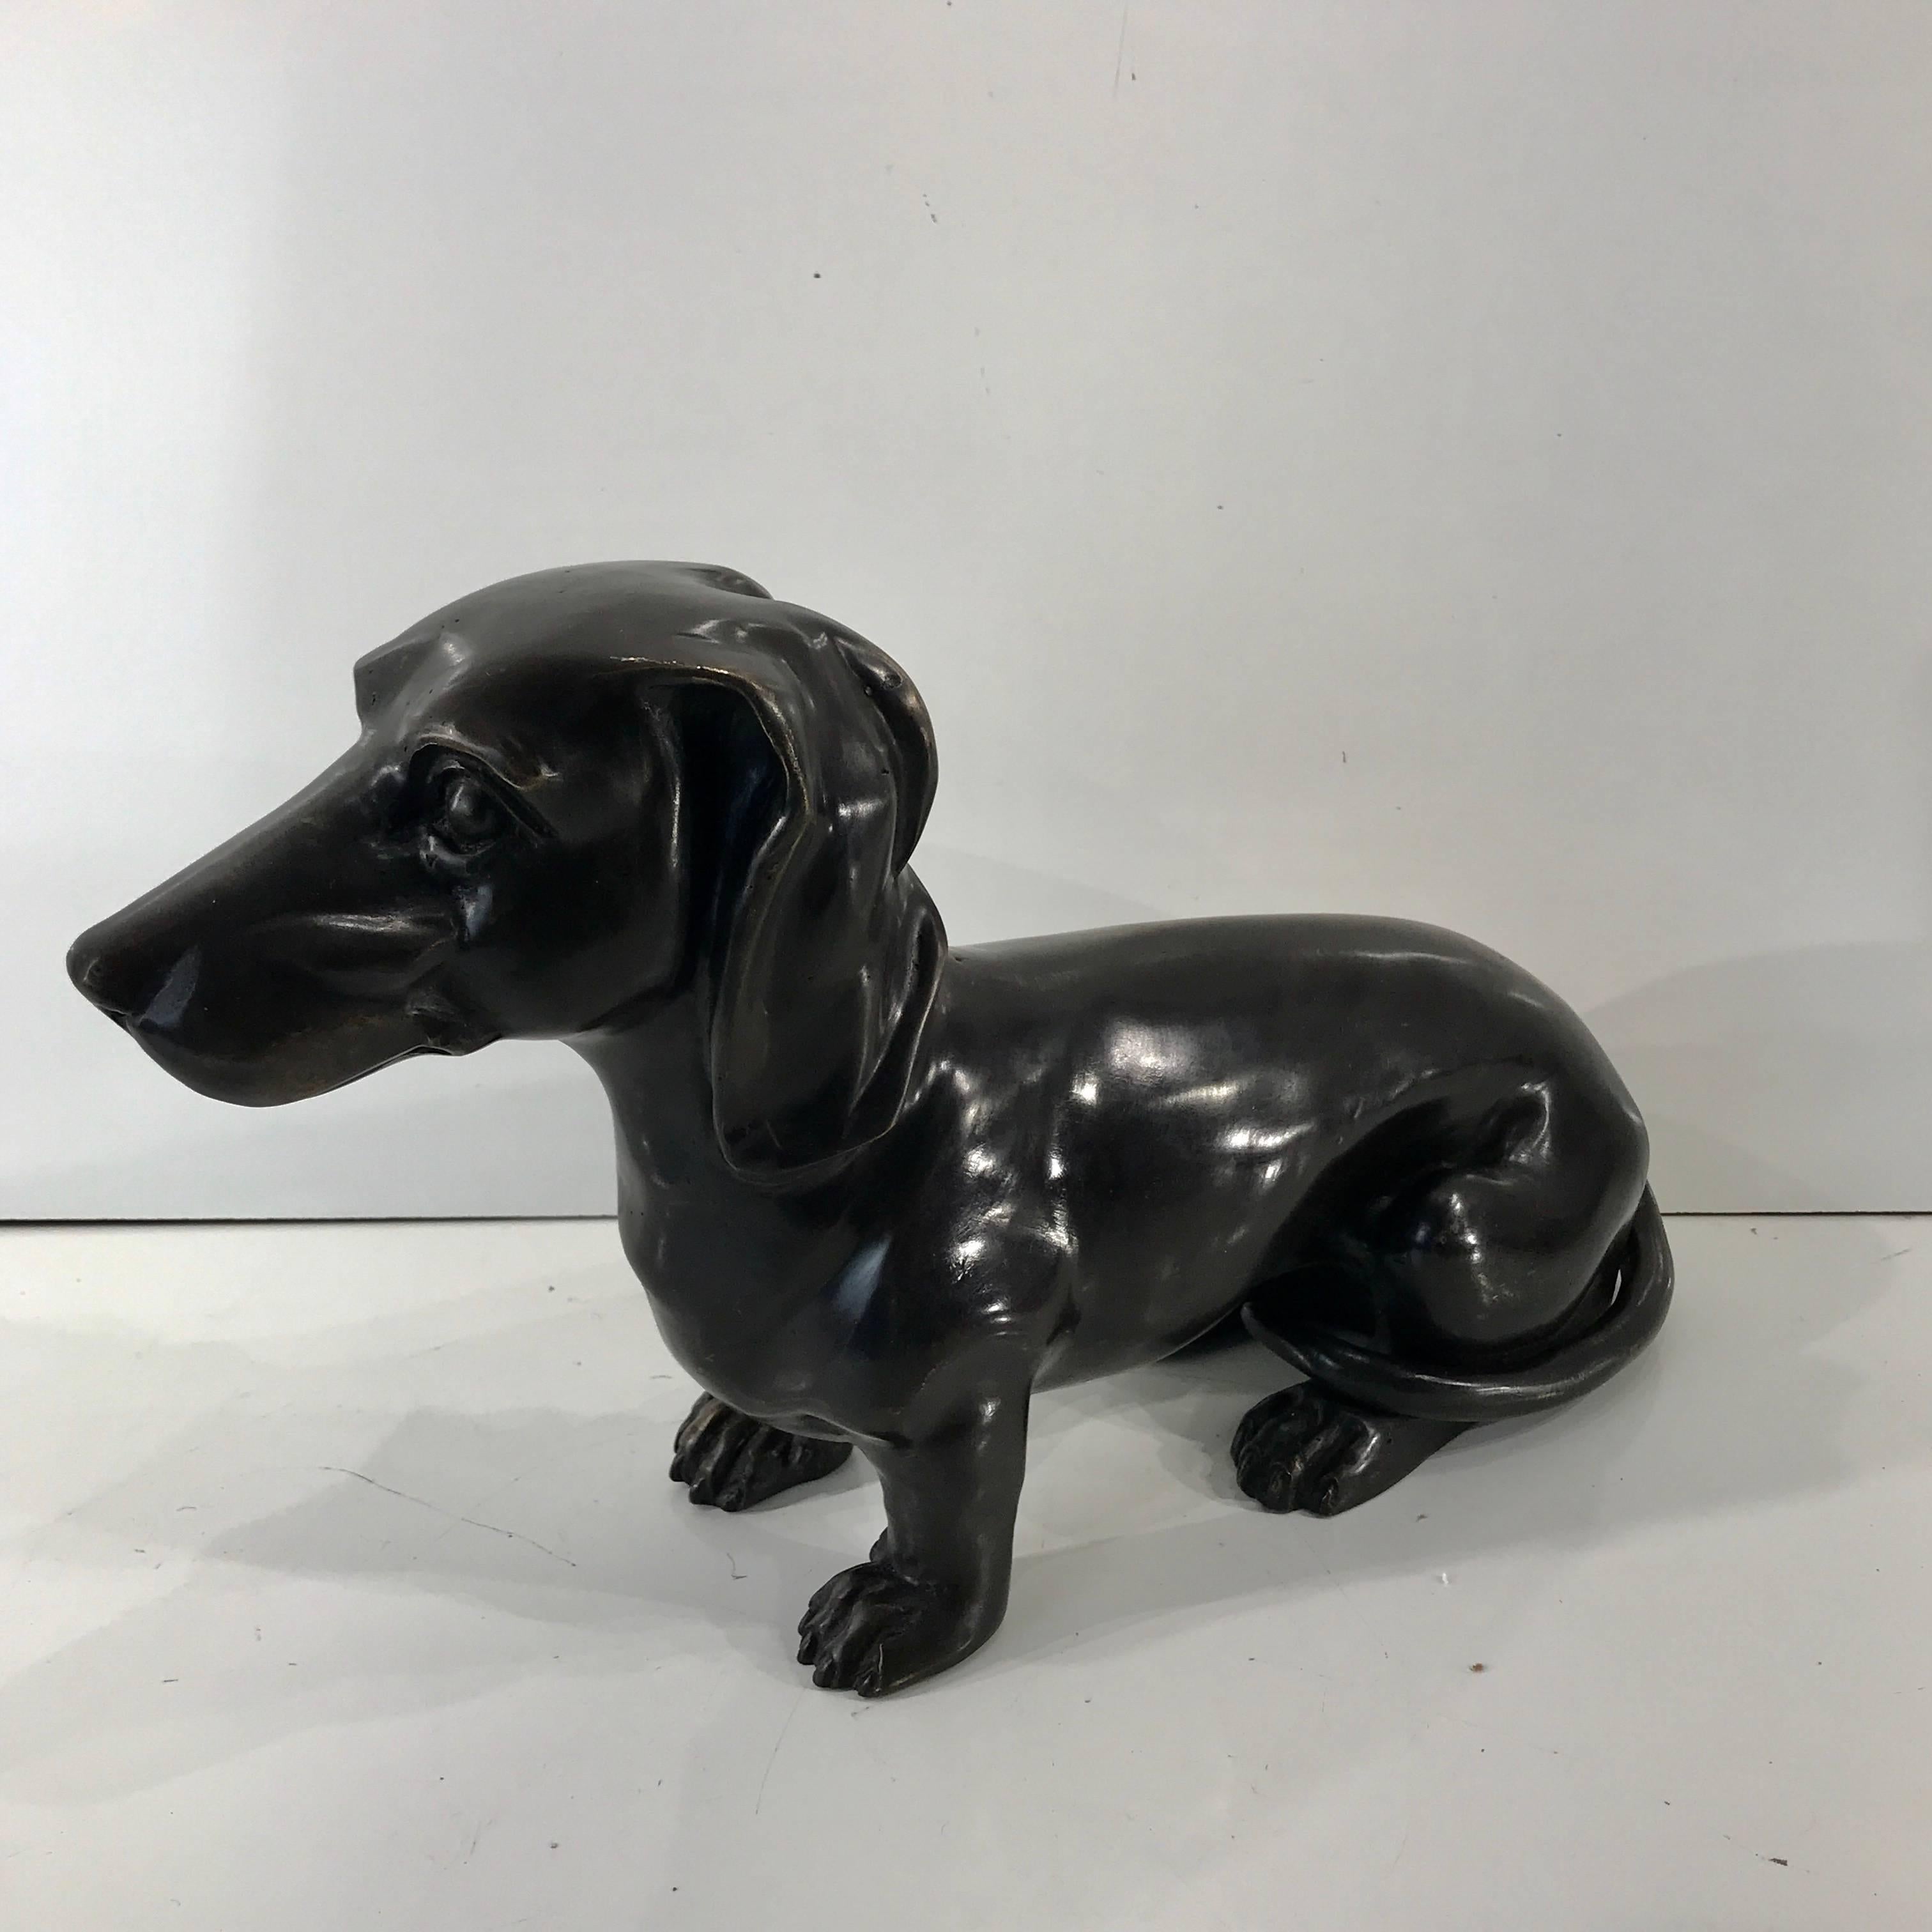 Midcentury bronze figure of a Seated Dachshund, nicely cast and modeled, unsigned. The base measures 10.5